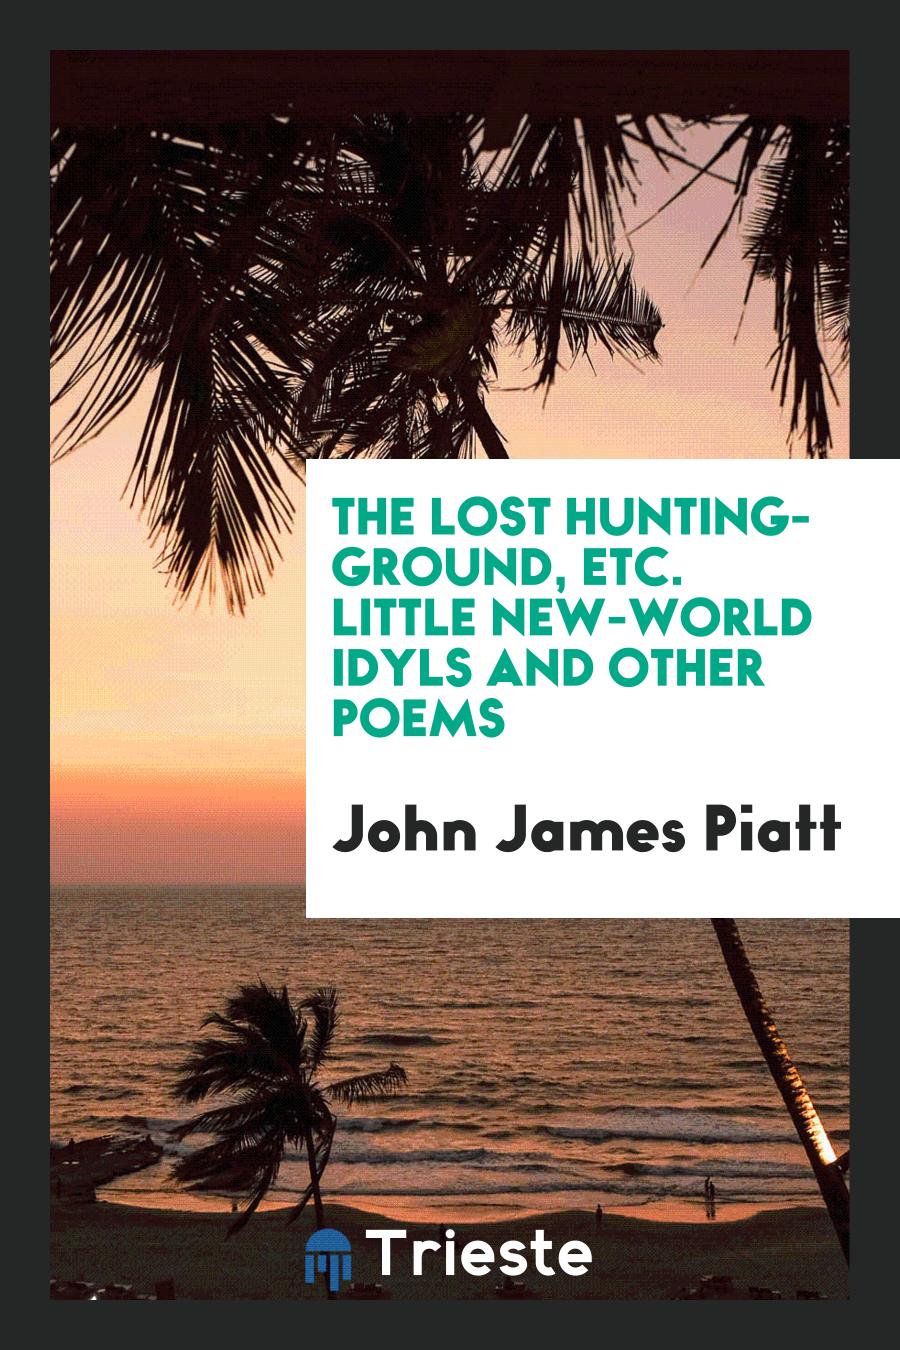 The Lost Hunting-Ground, etc. Little New-World Idyls and Other Poems